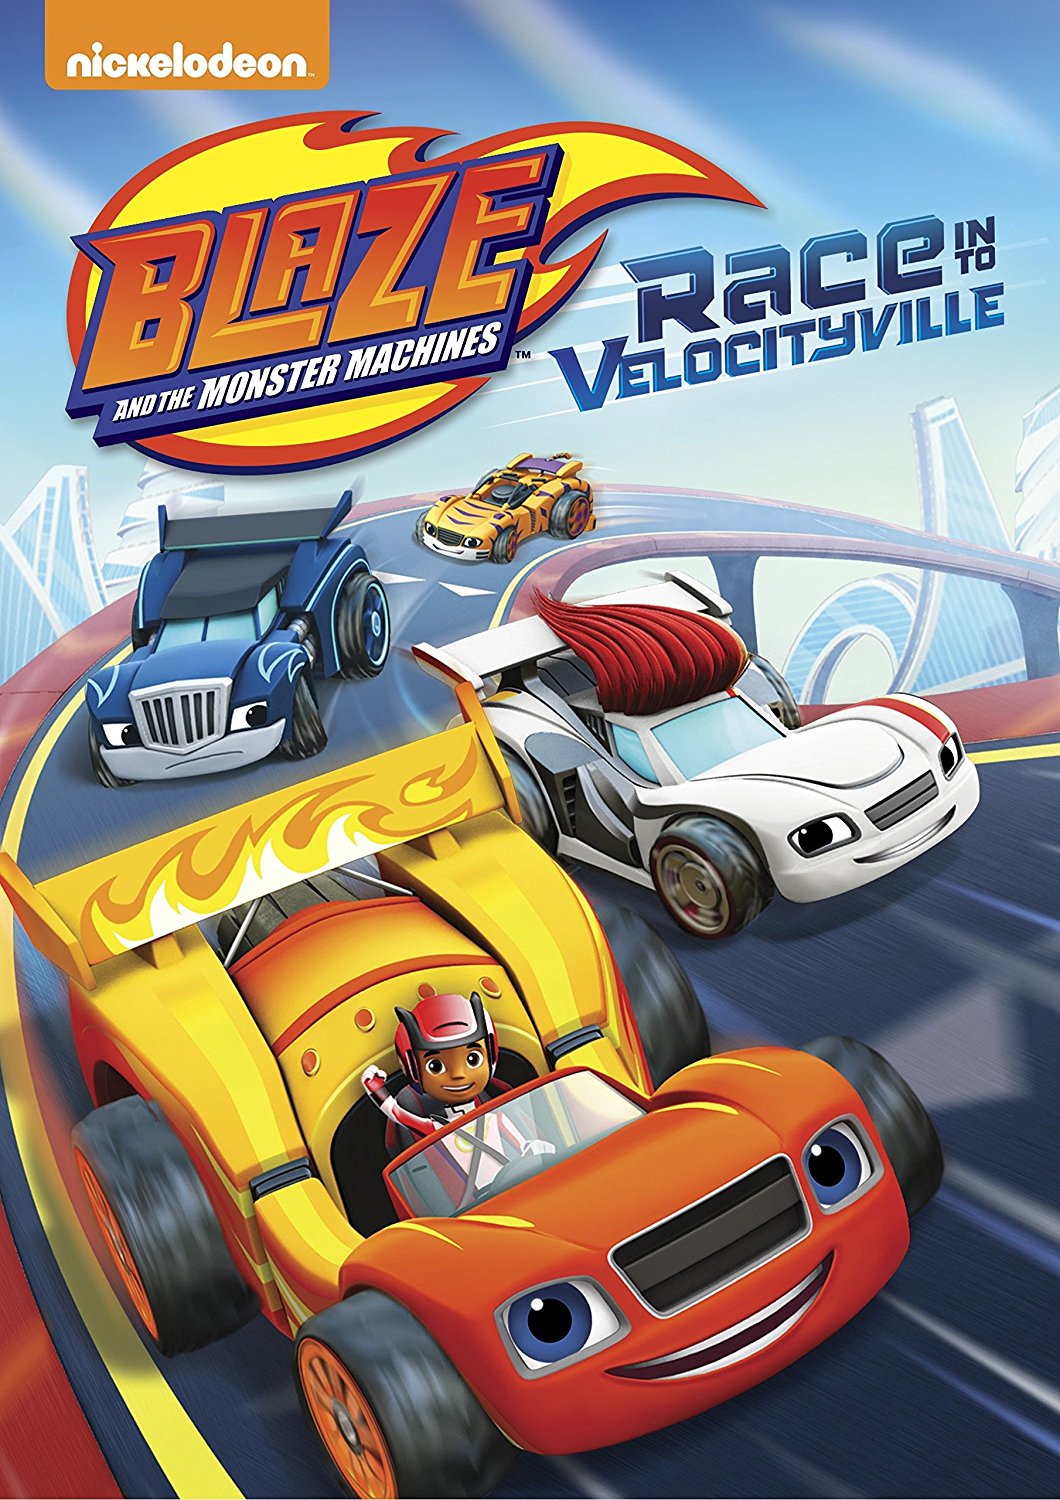 Blaze and the Monster Machines: Race in to Velocityville - Blu-ray Edition.